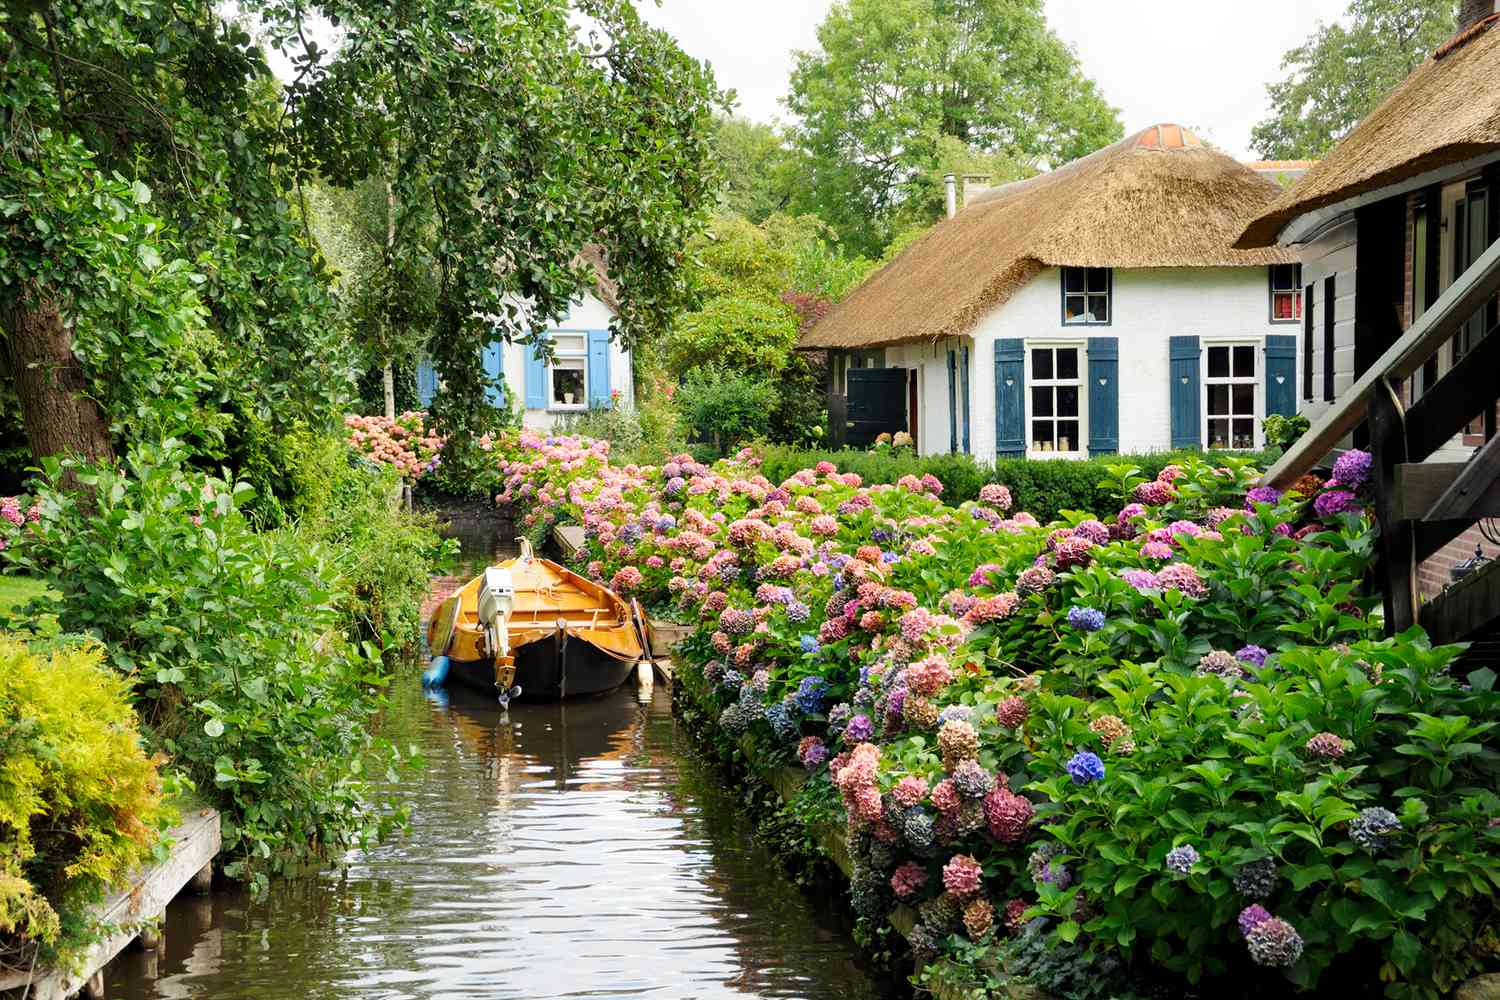 Giethoorn - There is no road in the village!